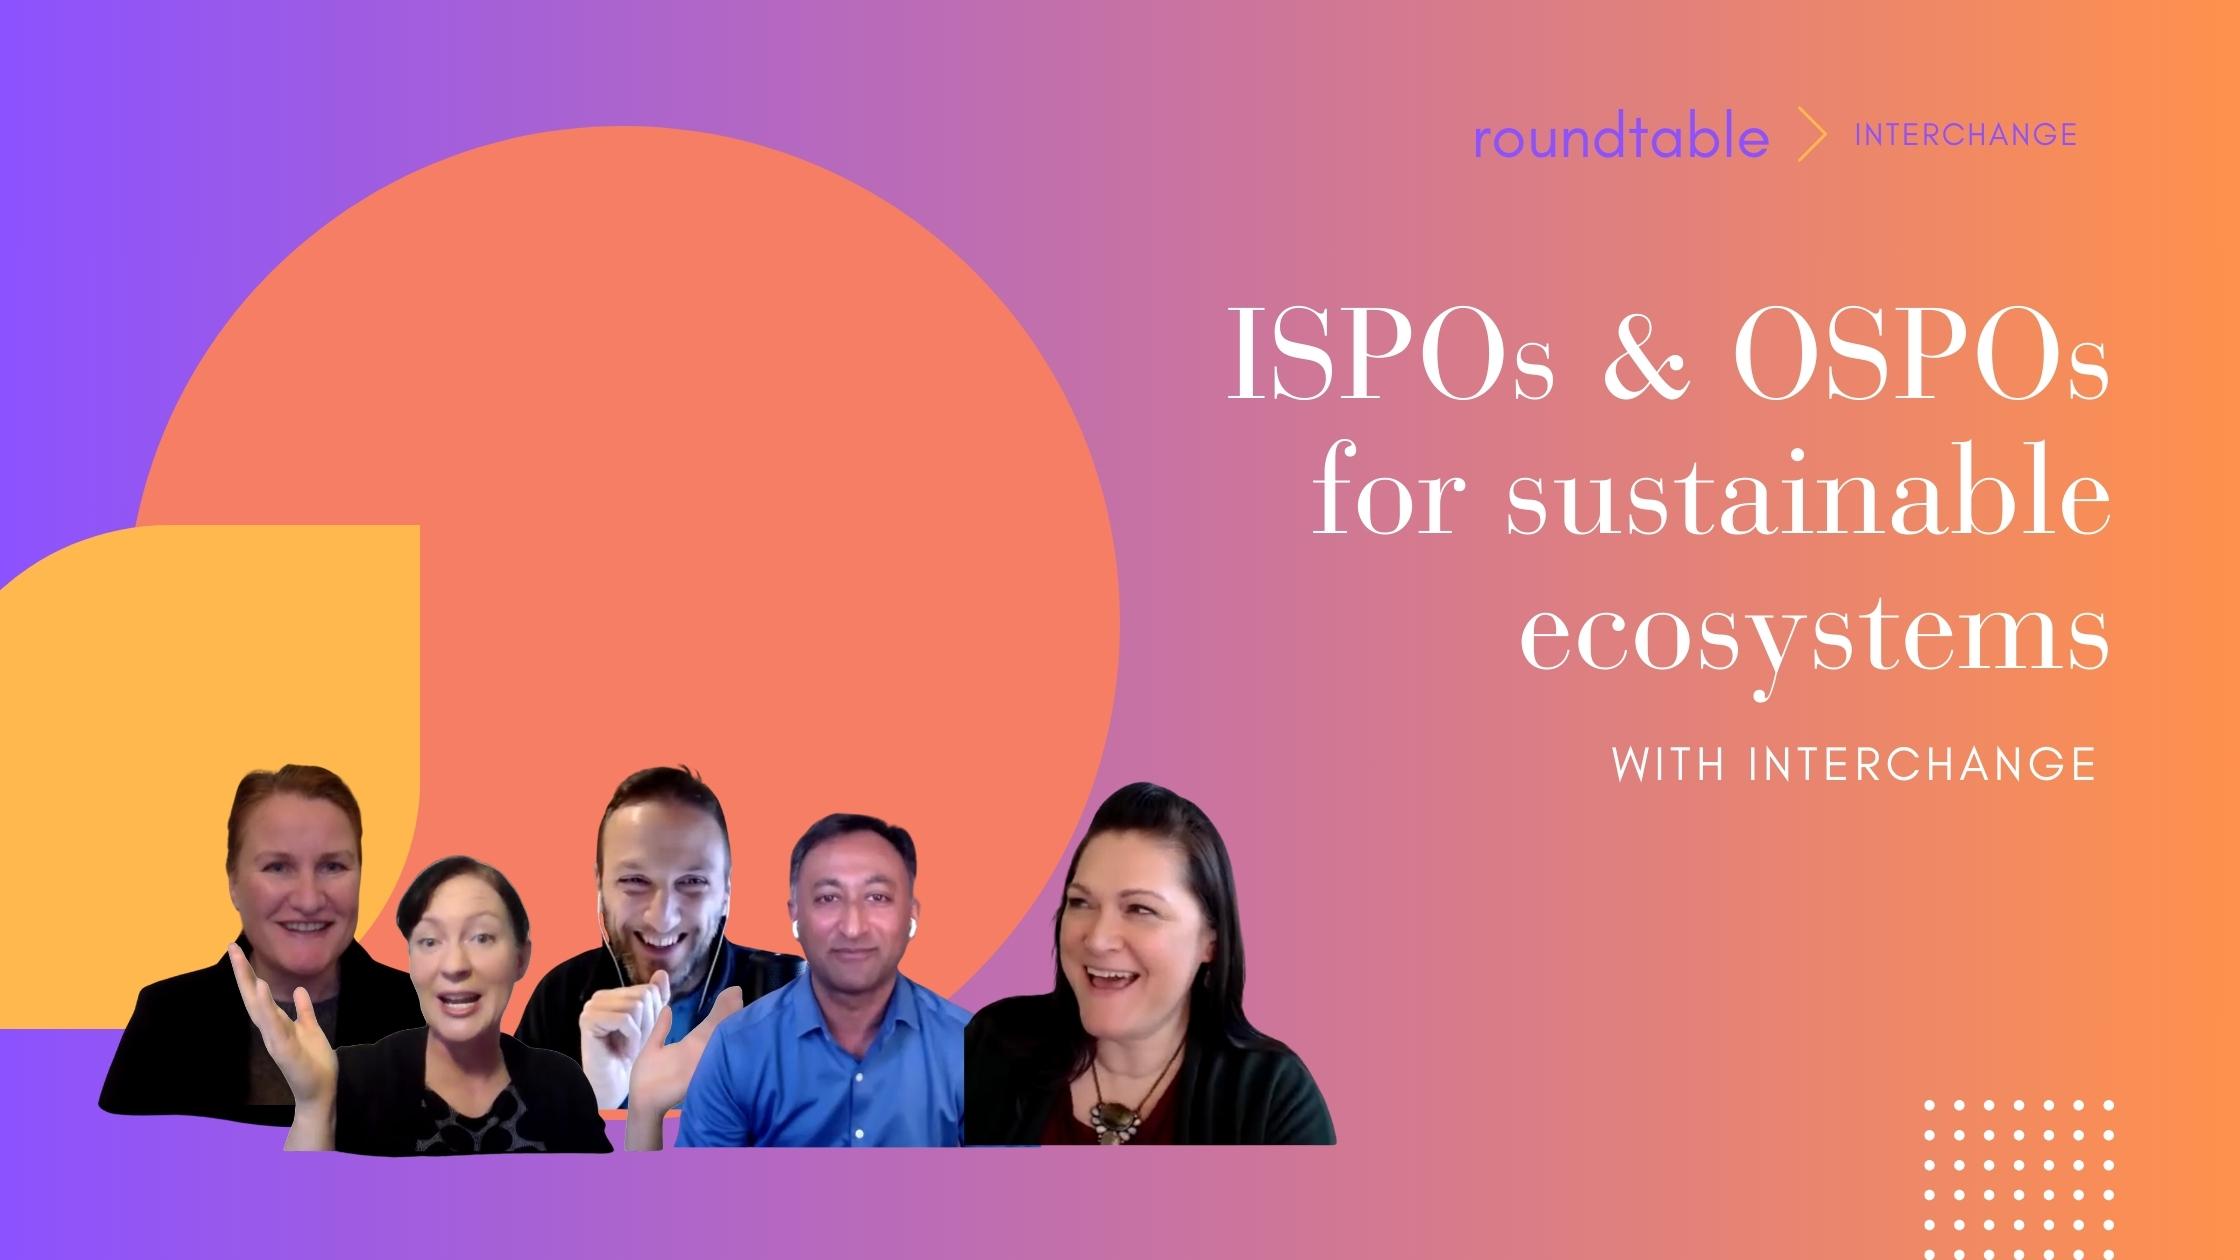 ISPOs and OSPOs for sustainable ecosystems